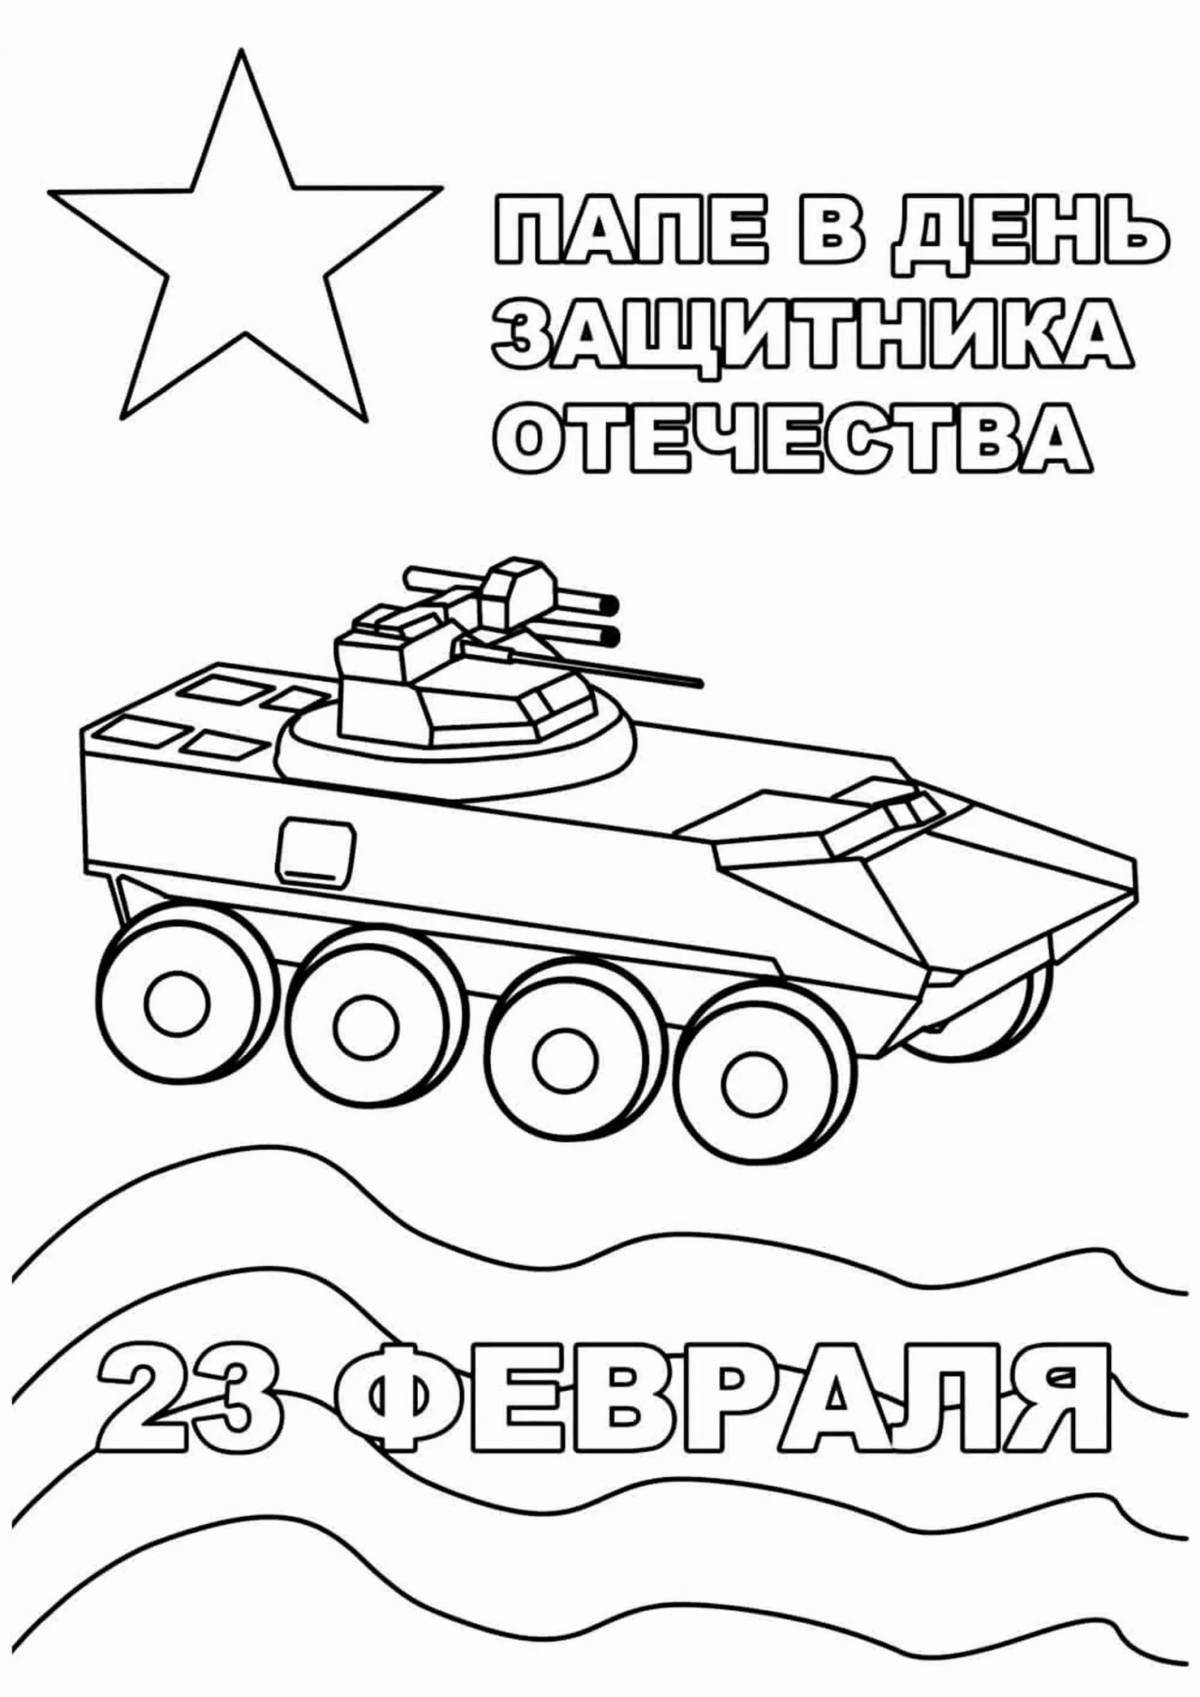 Happy Defender of the Fatherland Day postcard #10